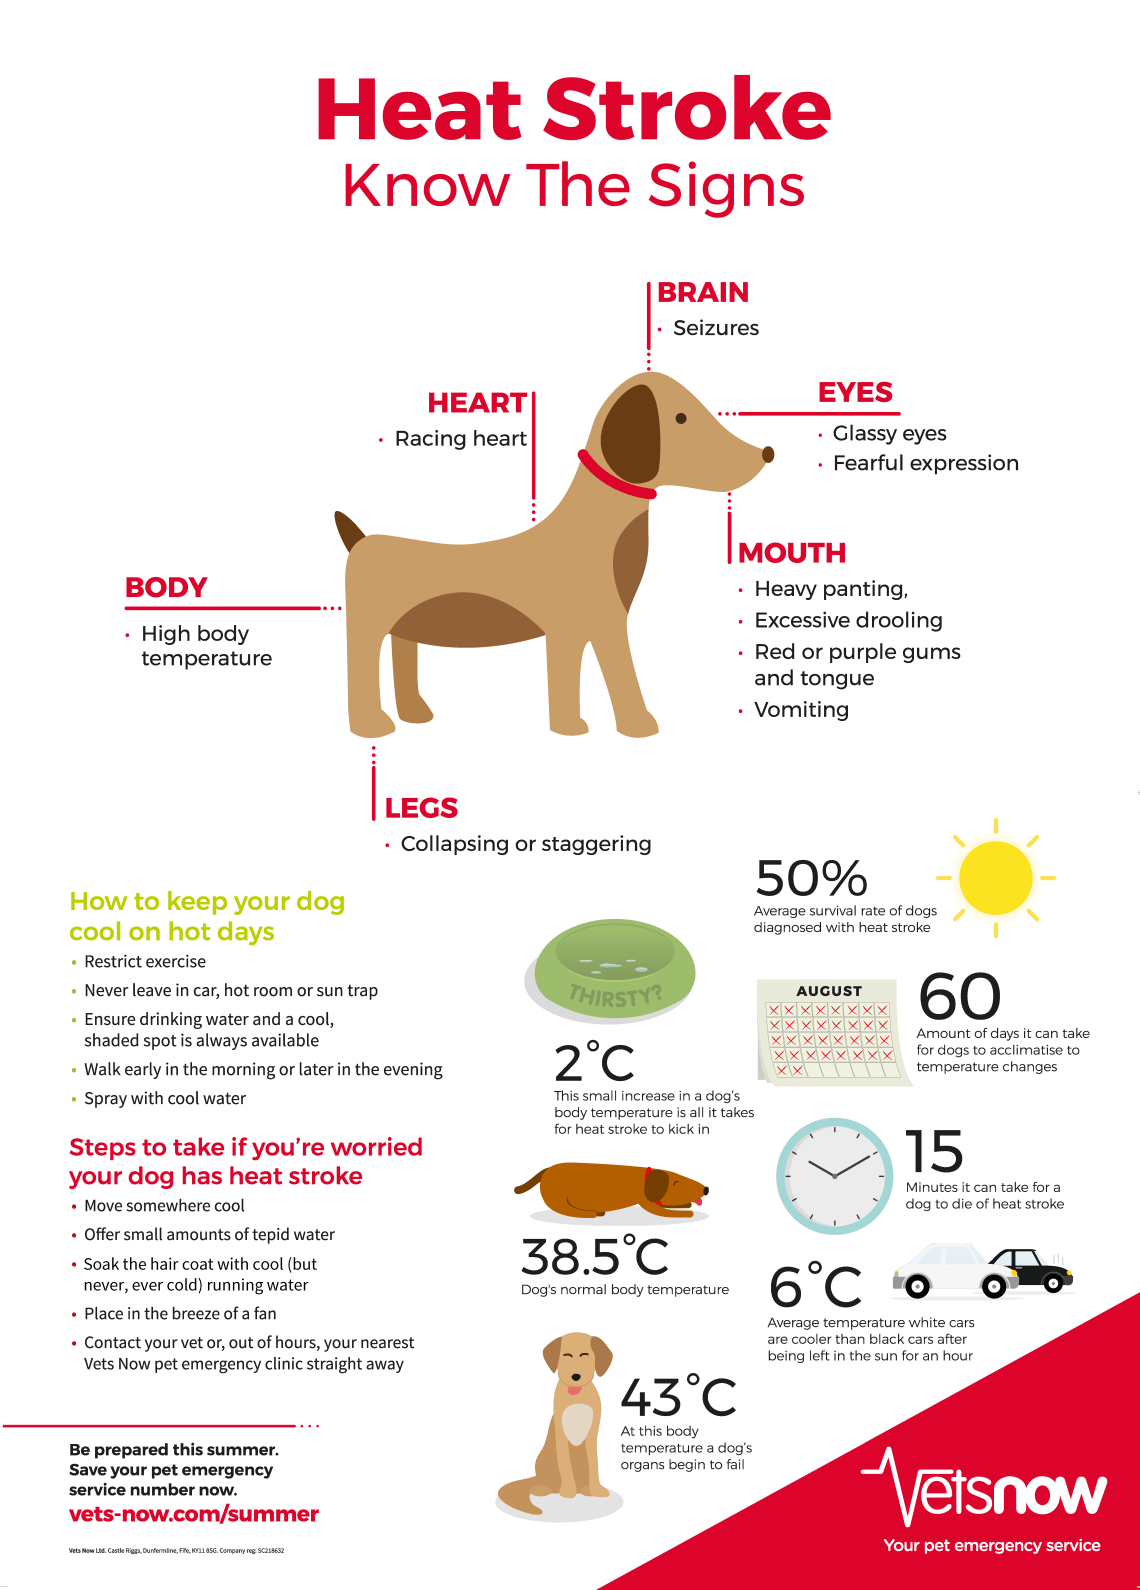 Stroke in a dog: symptoms and treatment